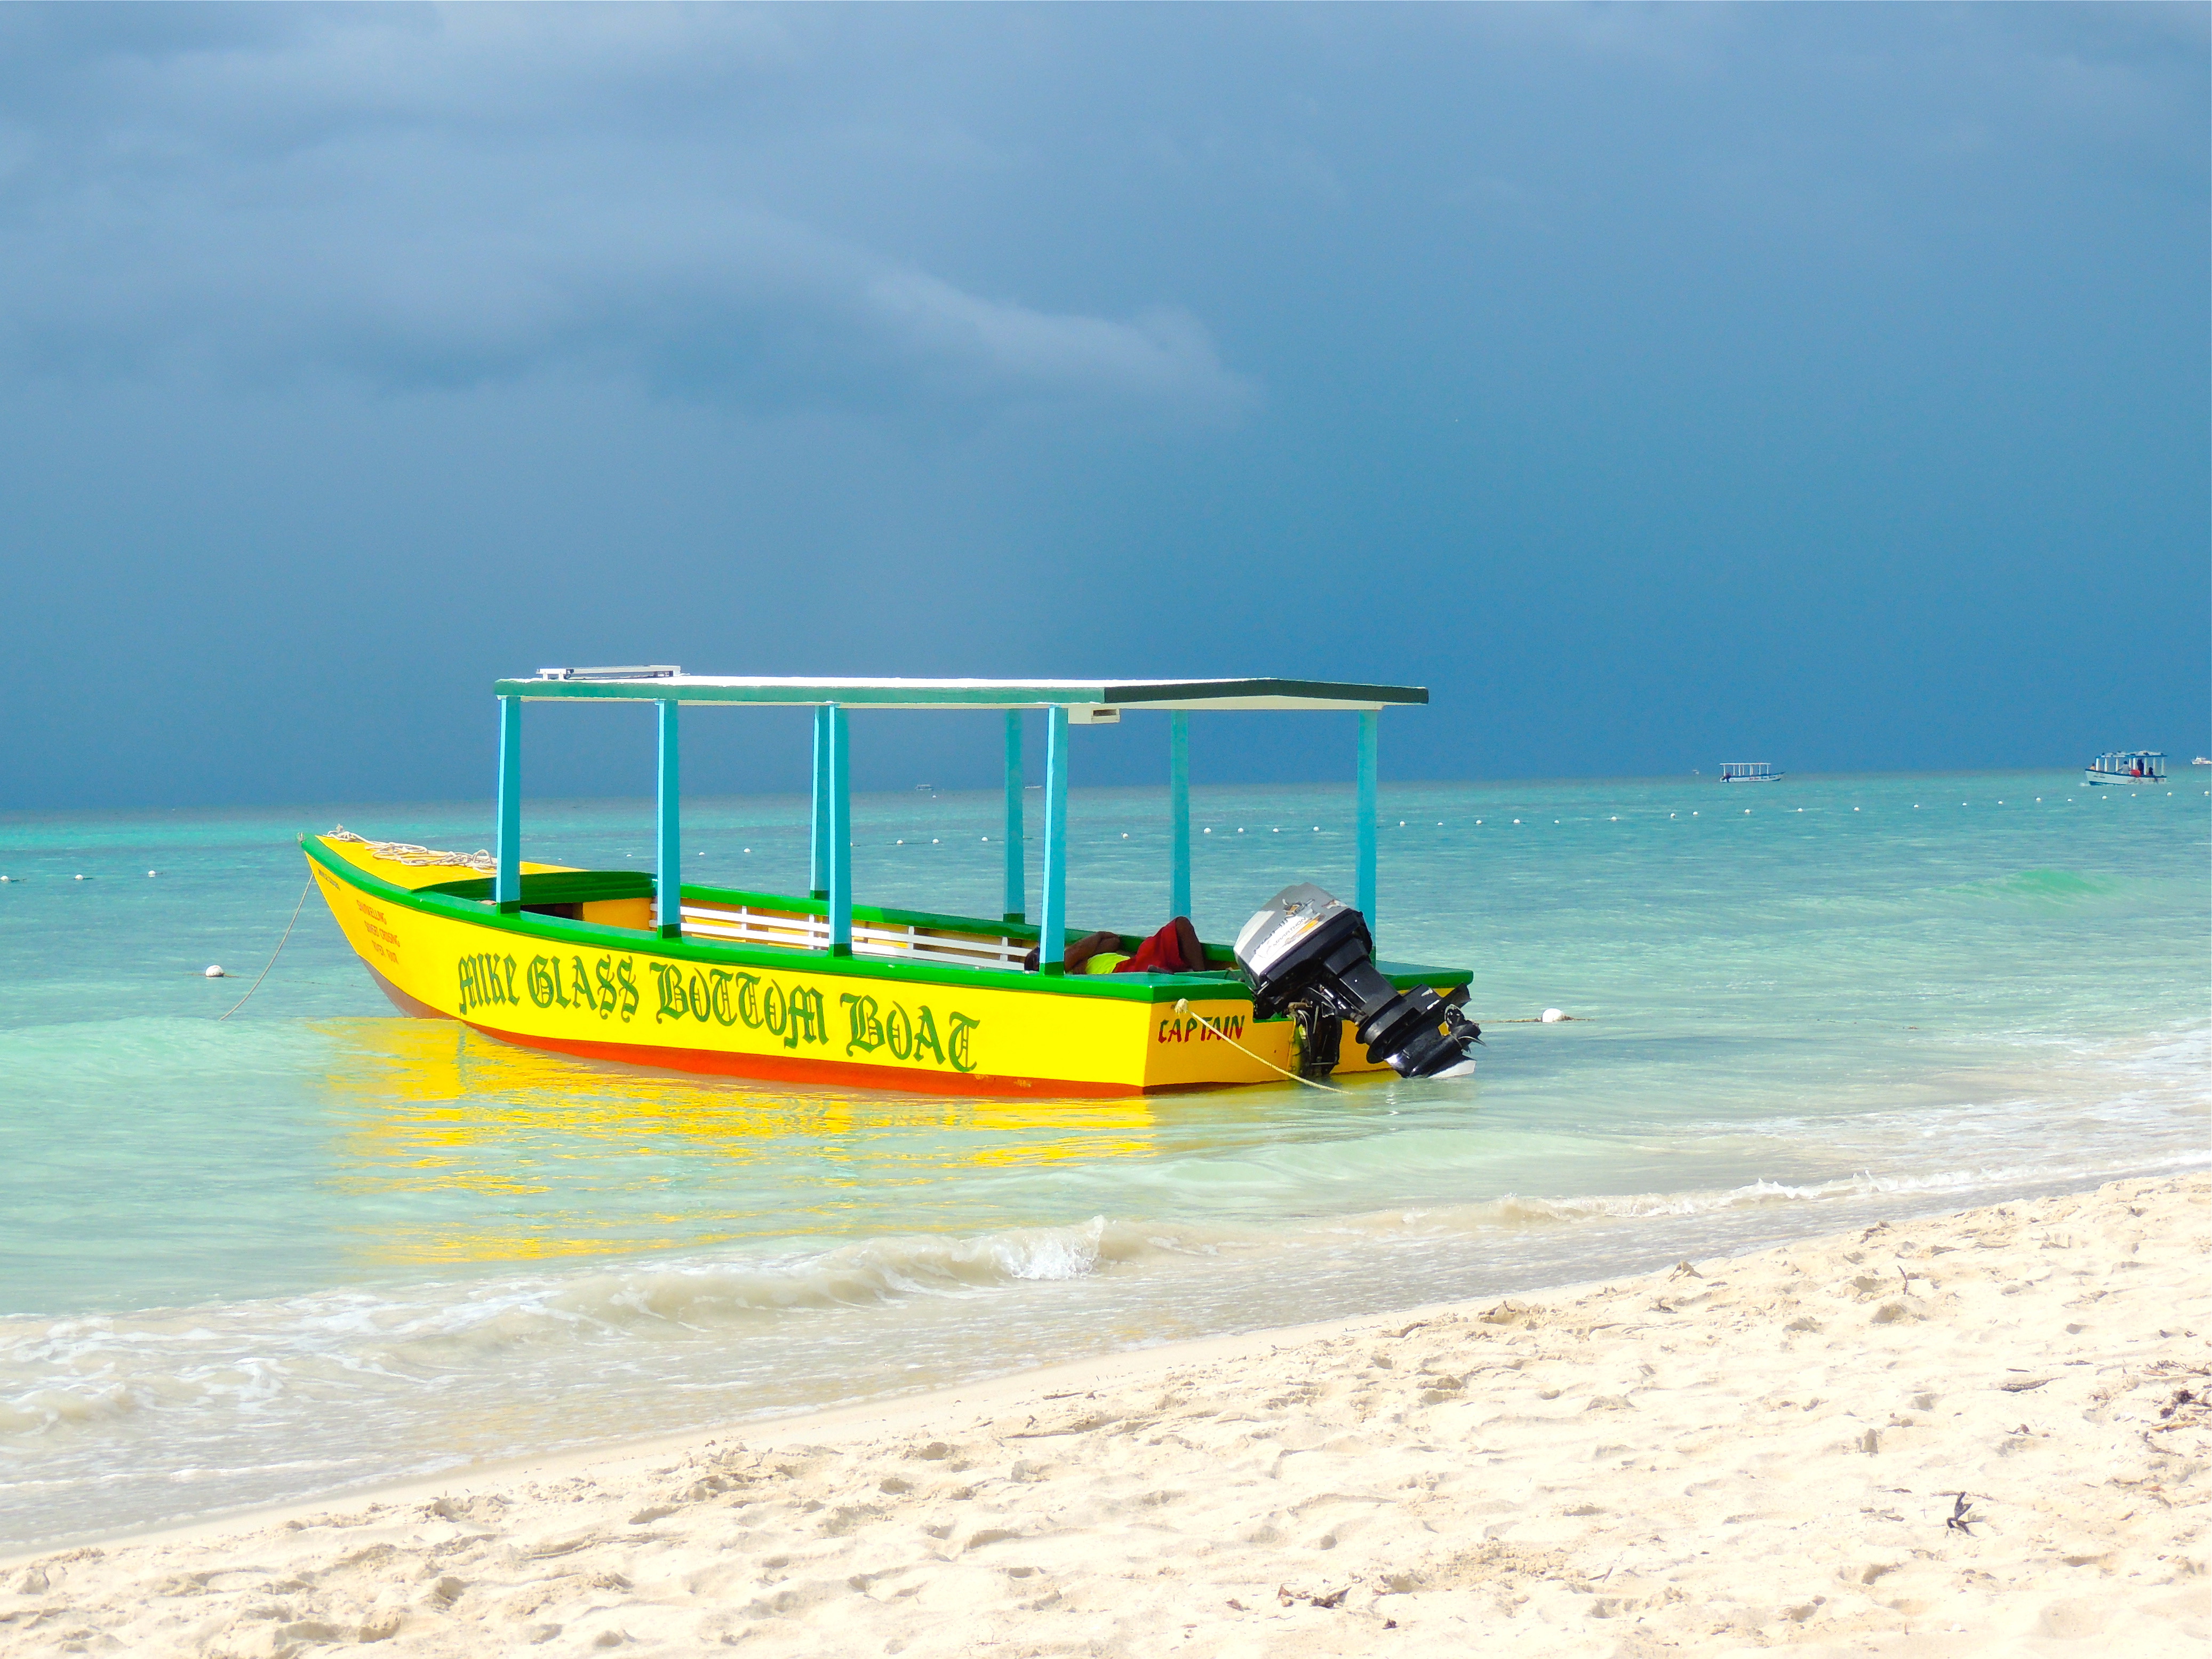 A lone glass bottom boat in Negril, Jamaica.